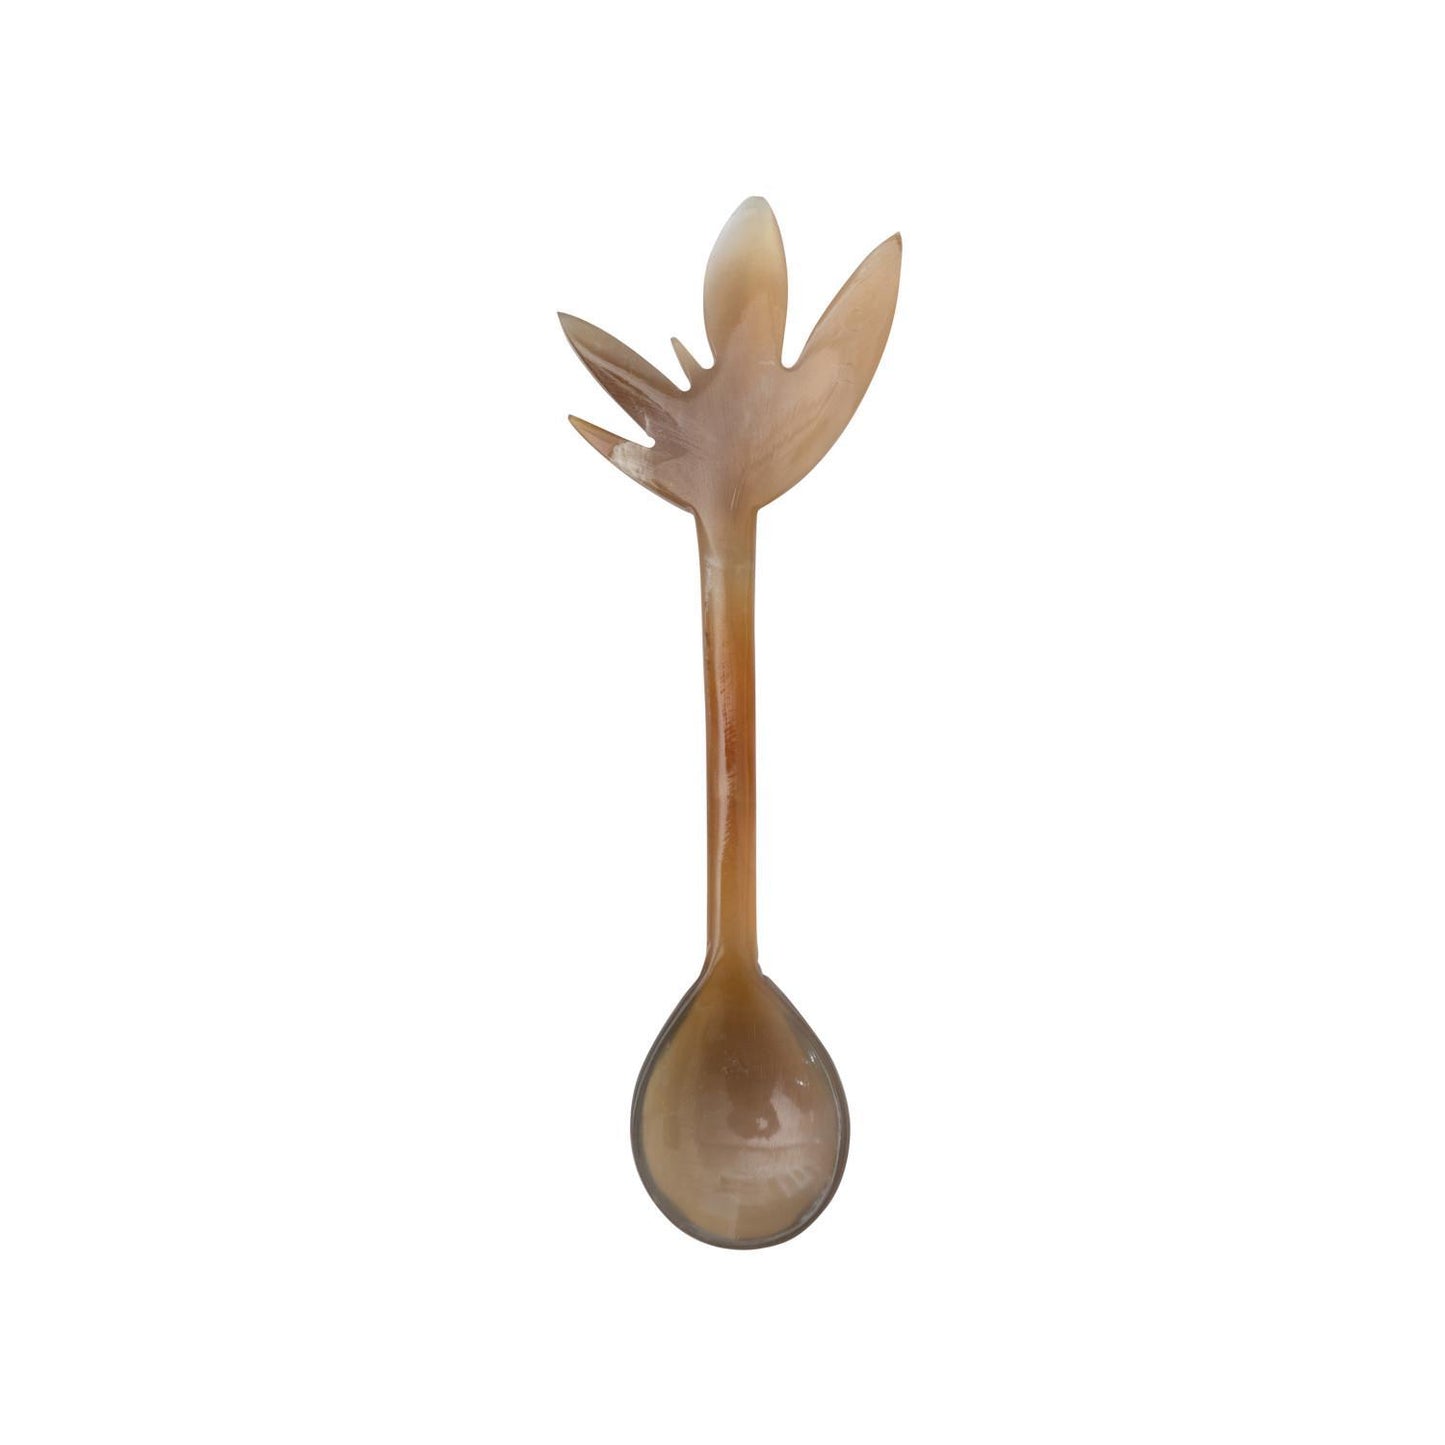 Hand-Carved Horn Spoon in Printed Drawstring Bag